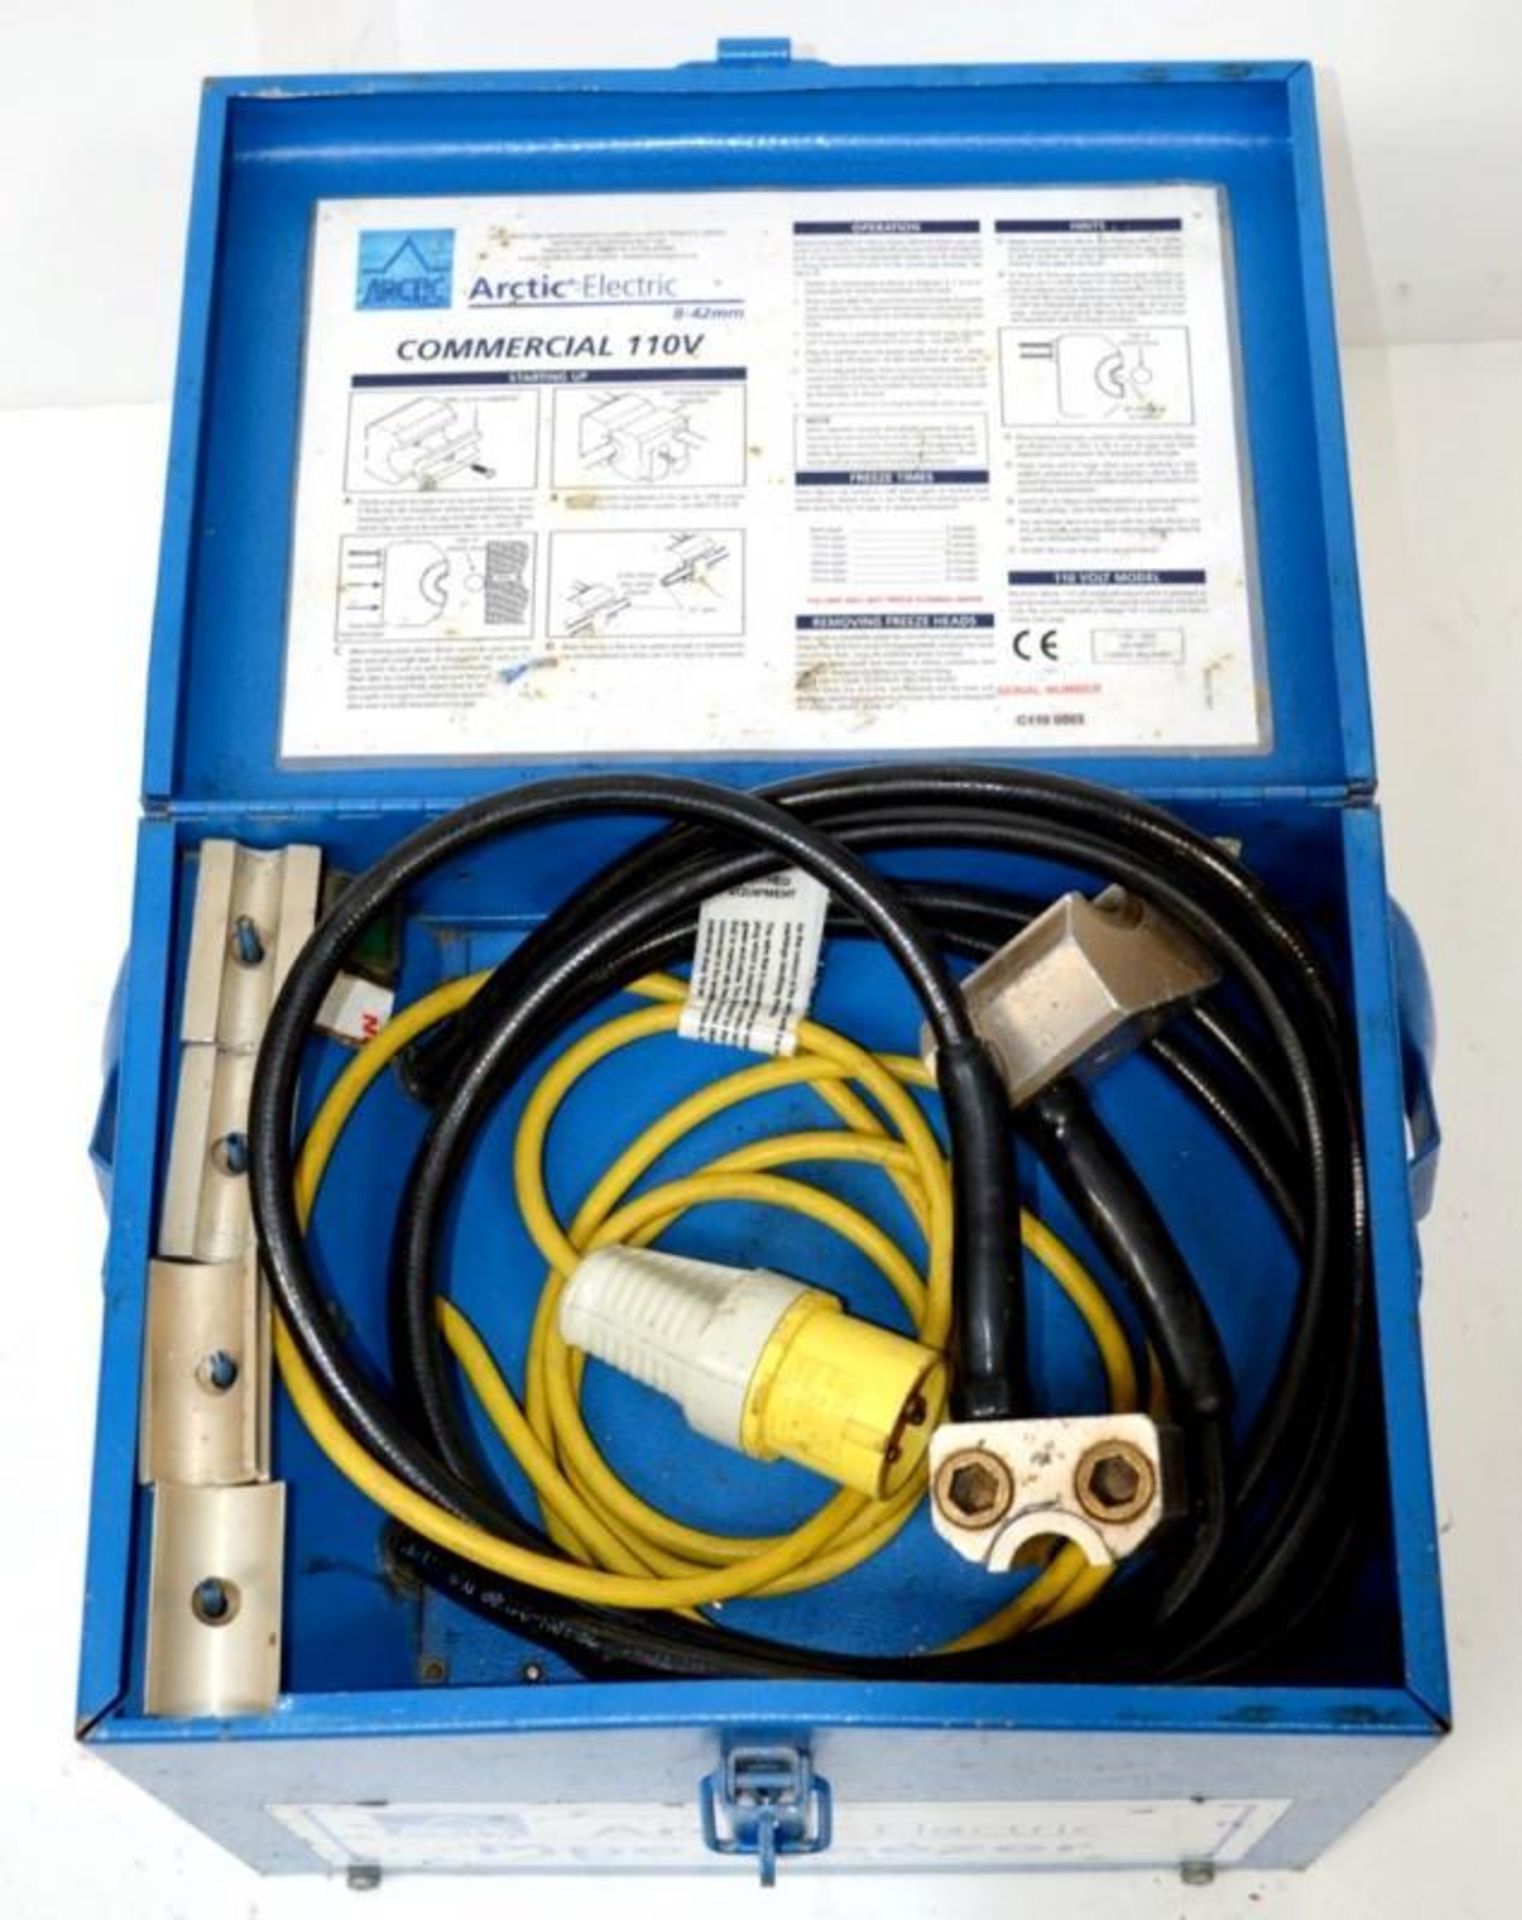 1 x Freeze Master Arctic Freeze Electric Pipe Freezer 110 volt - Used In Working Order - MWI014 - - Image 2 of 10